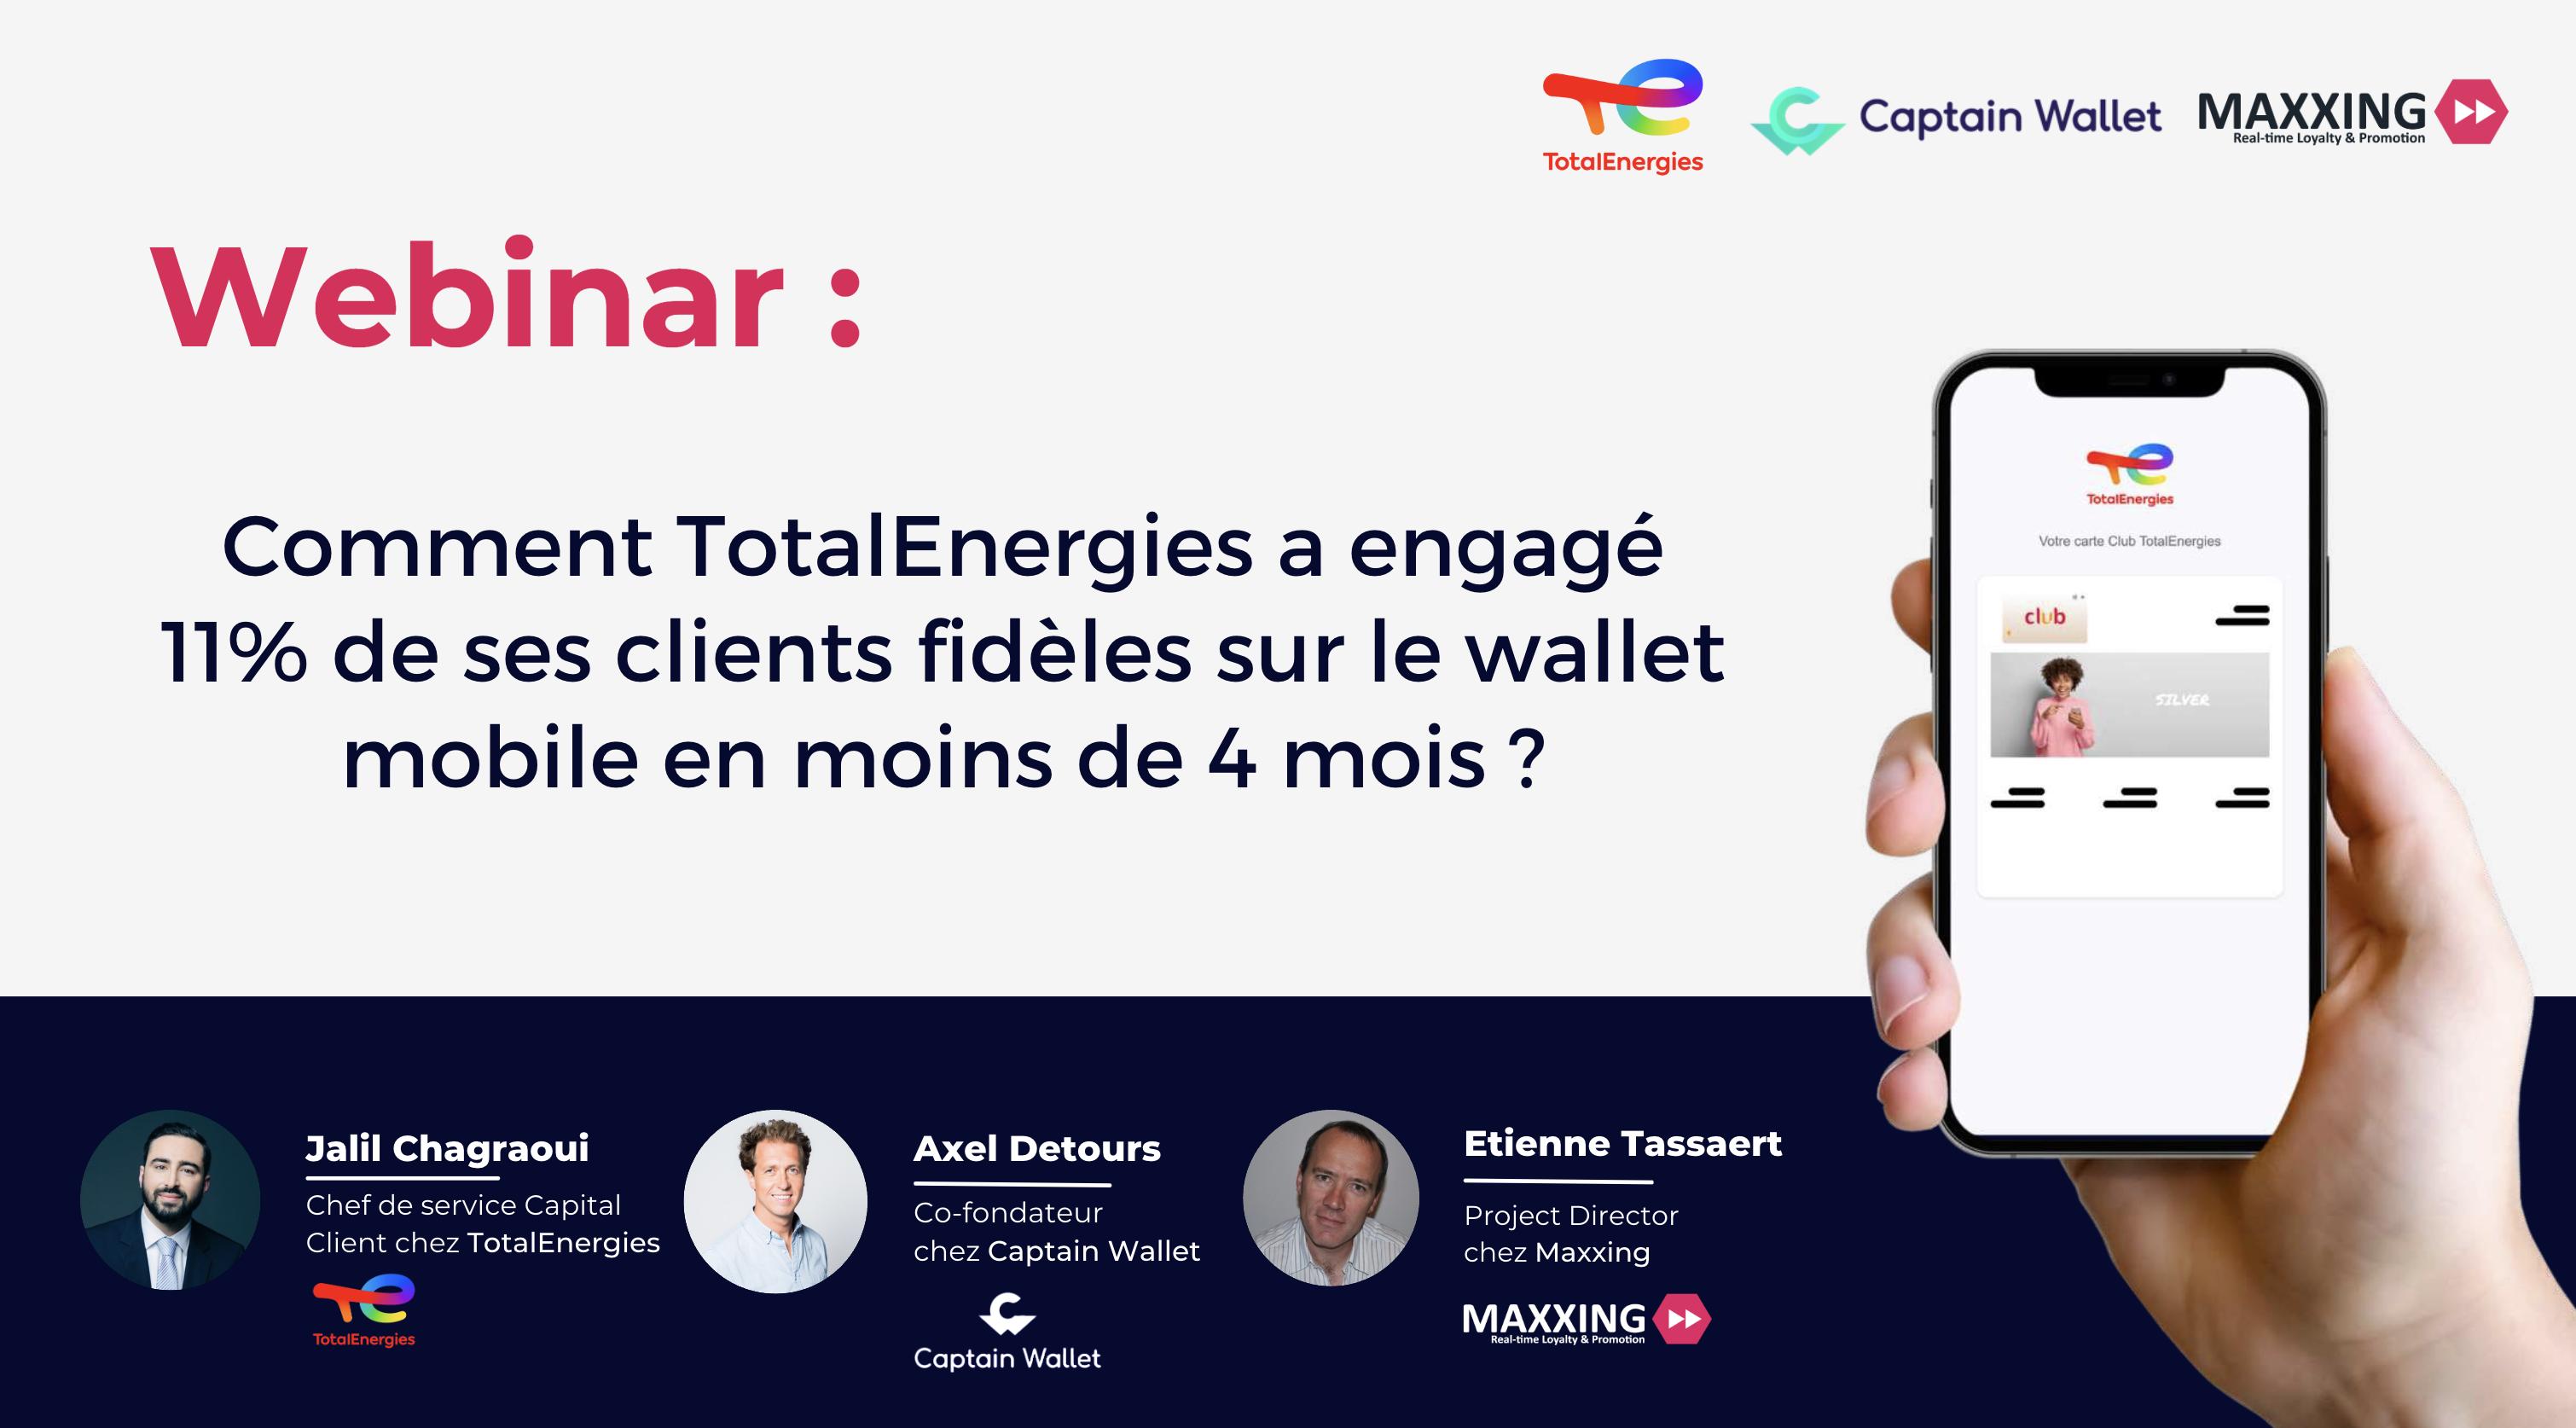 A look back at our webinar with Total Energies and Captain Wallet!